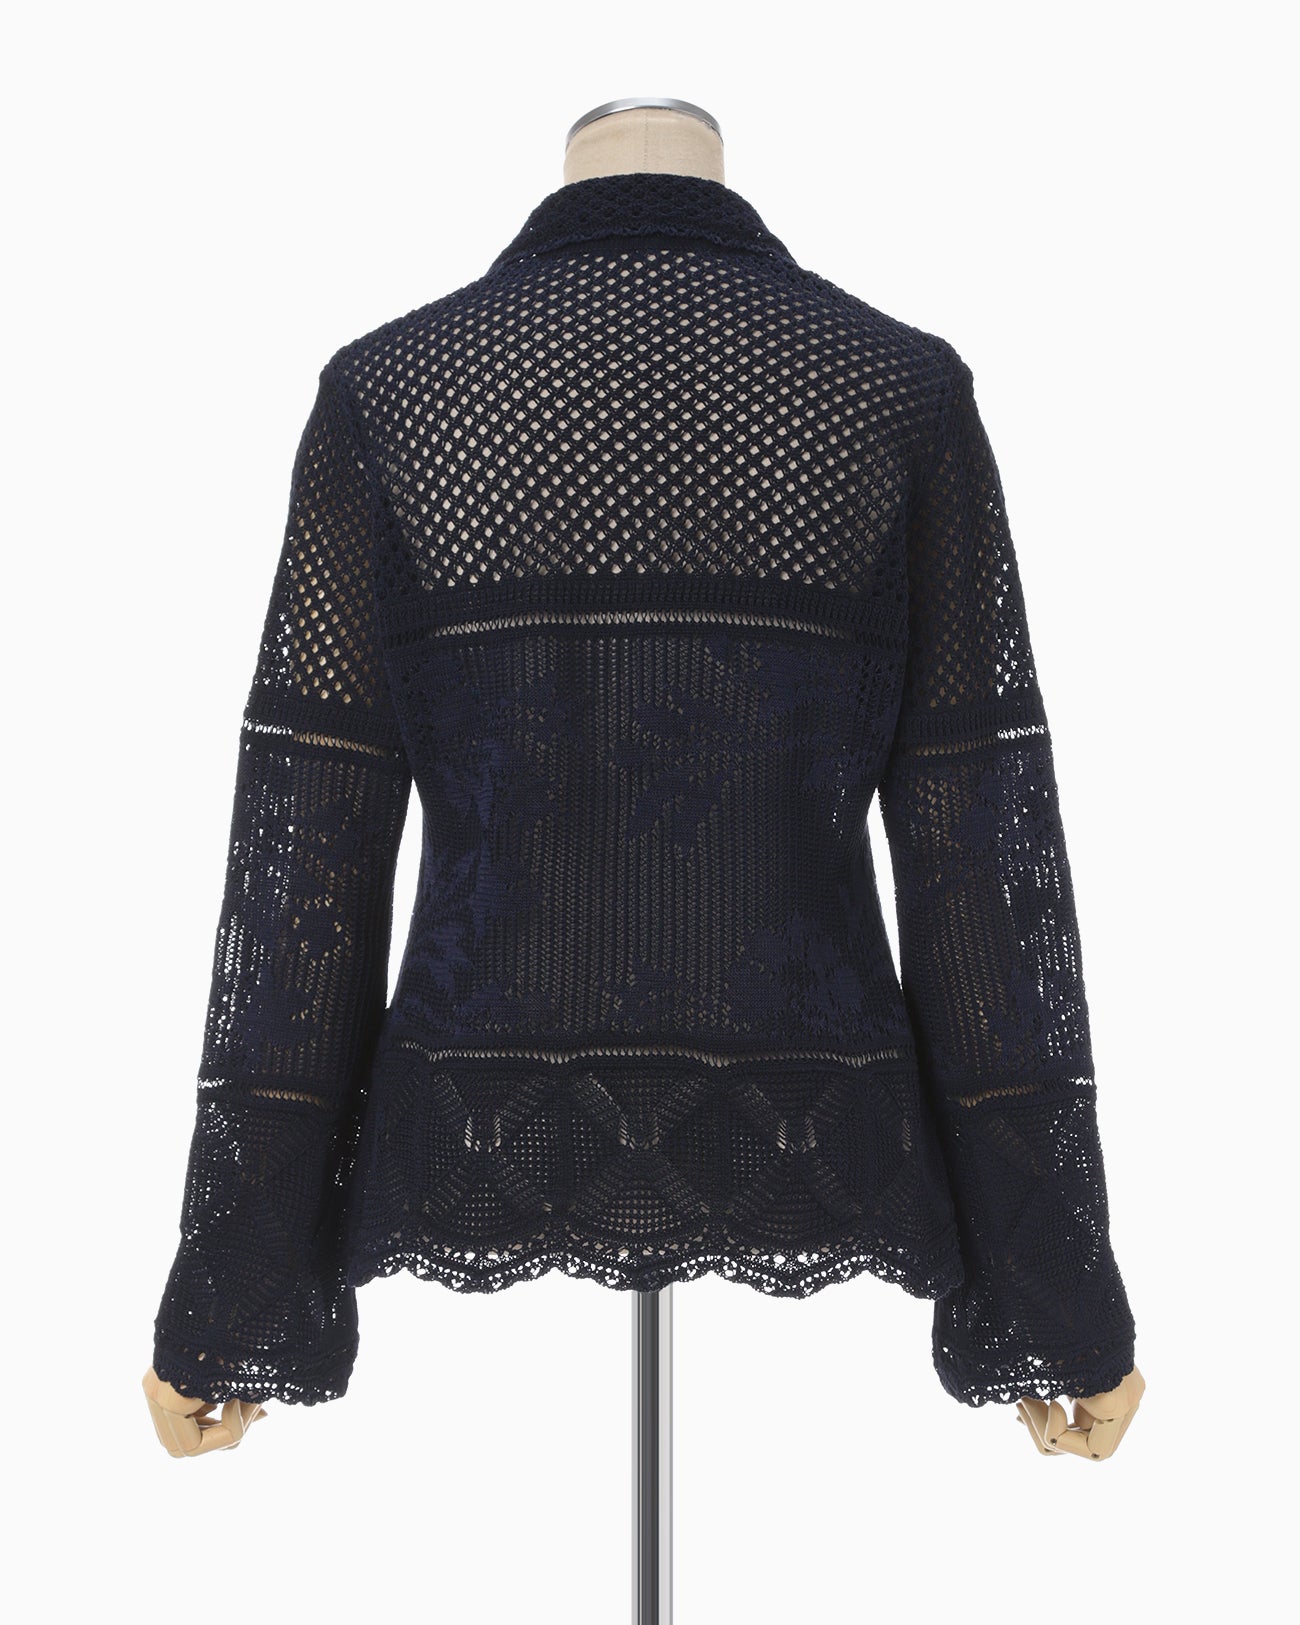 Cotton Lace Knitted Cardigan - navy